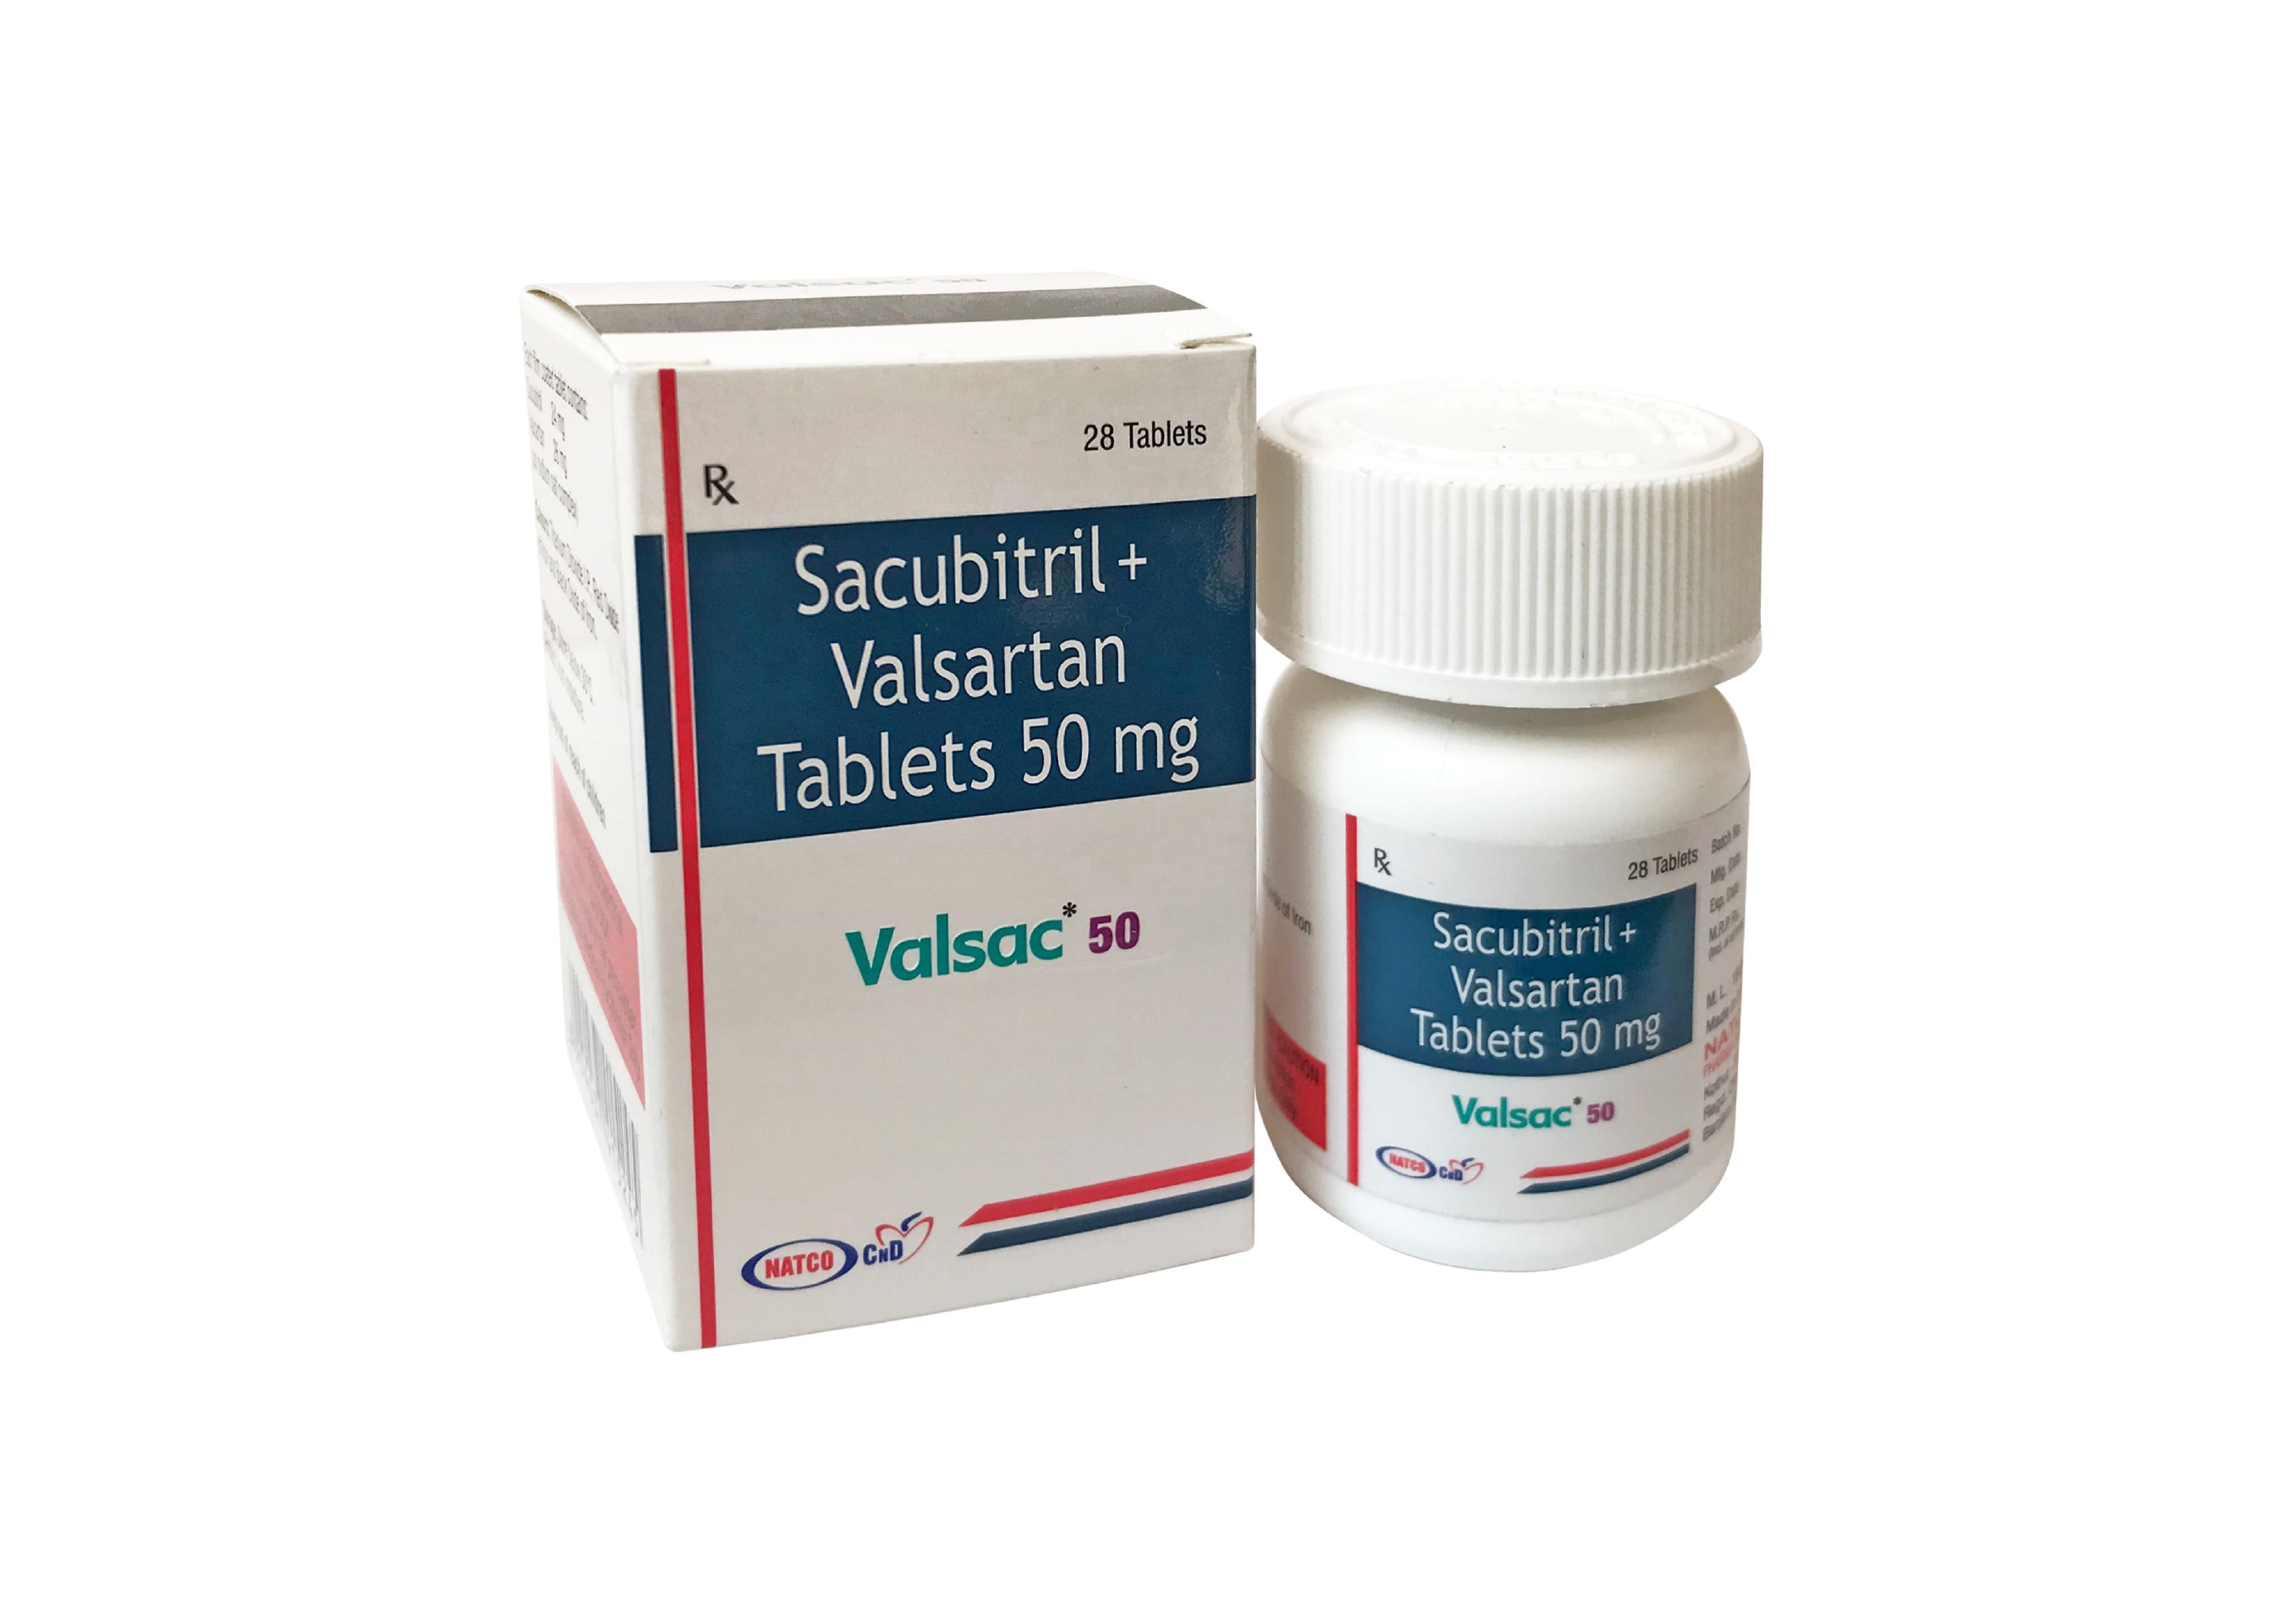 NATCO launches Valsartan-Sacubitril tablet in INDIA at an affordable price, under its brand VALSAC 